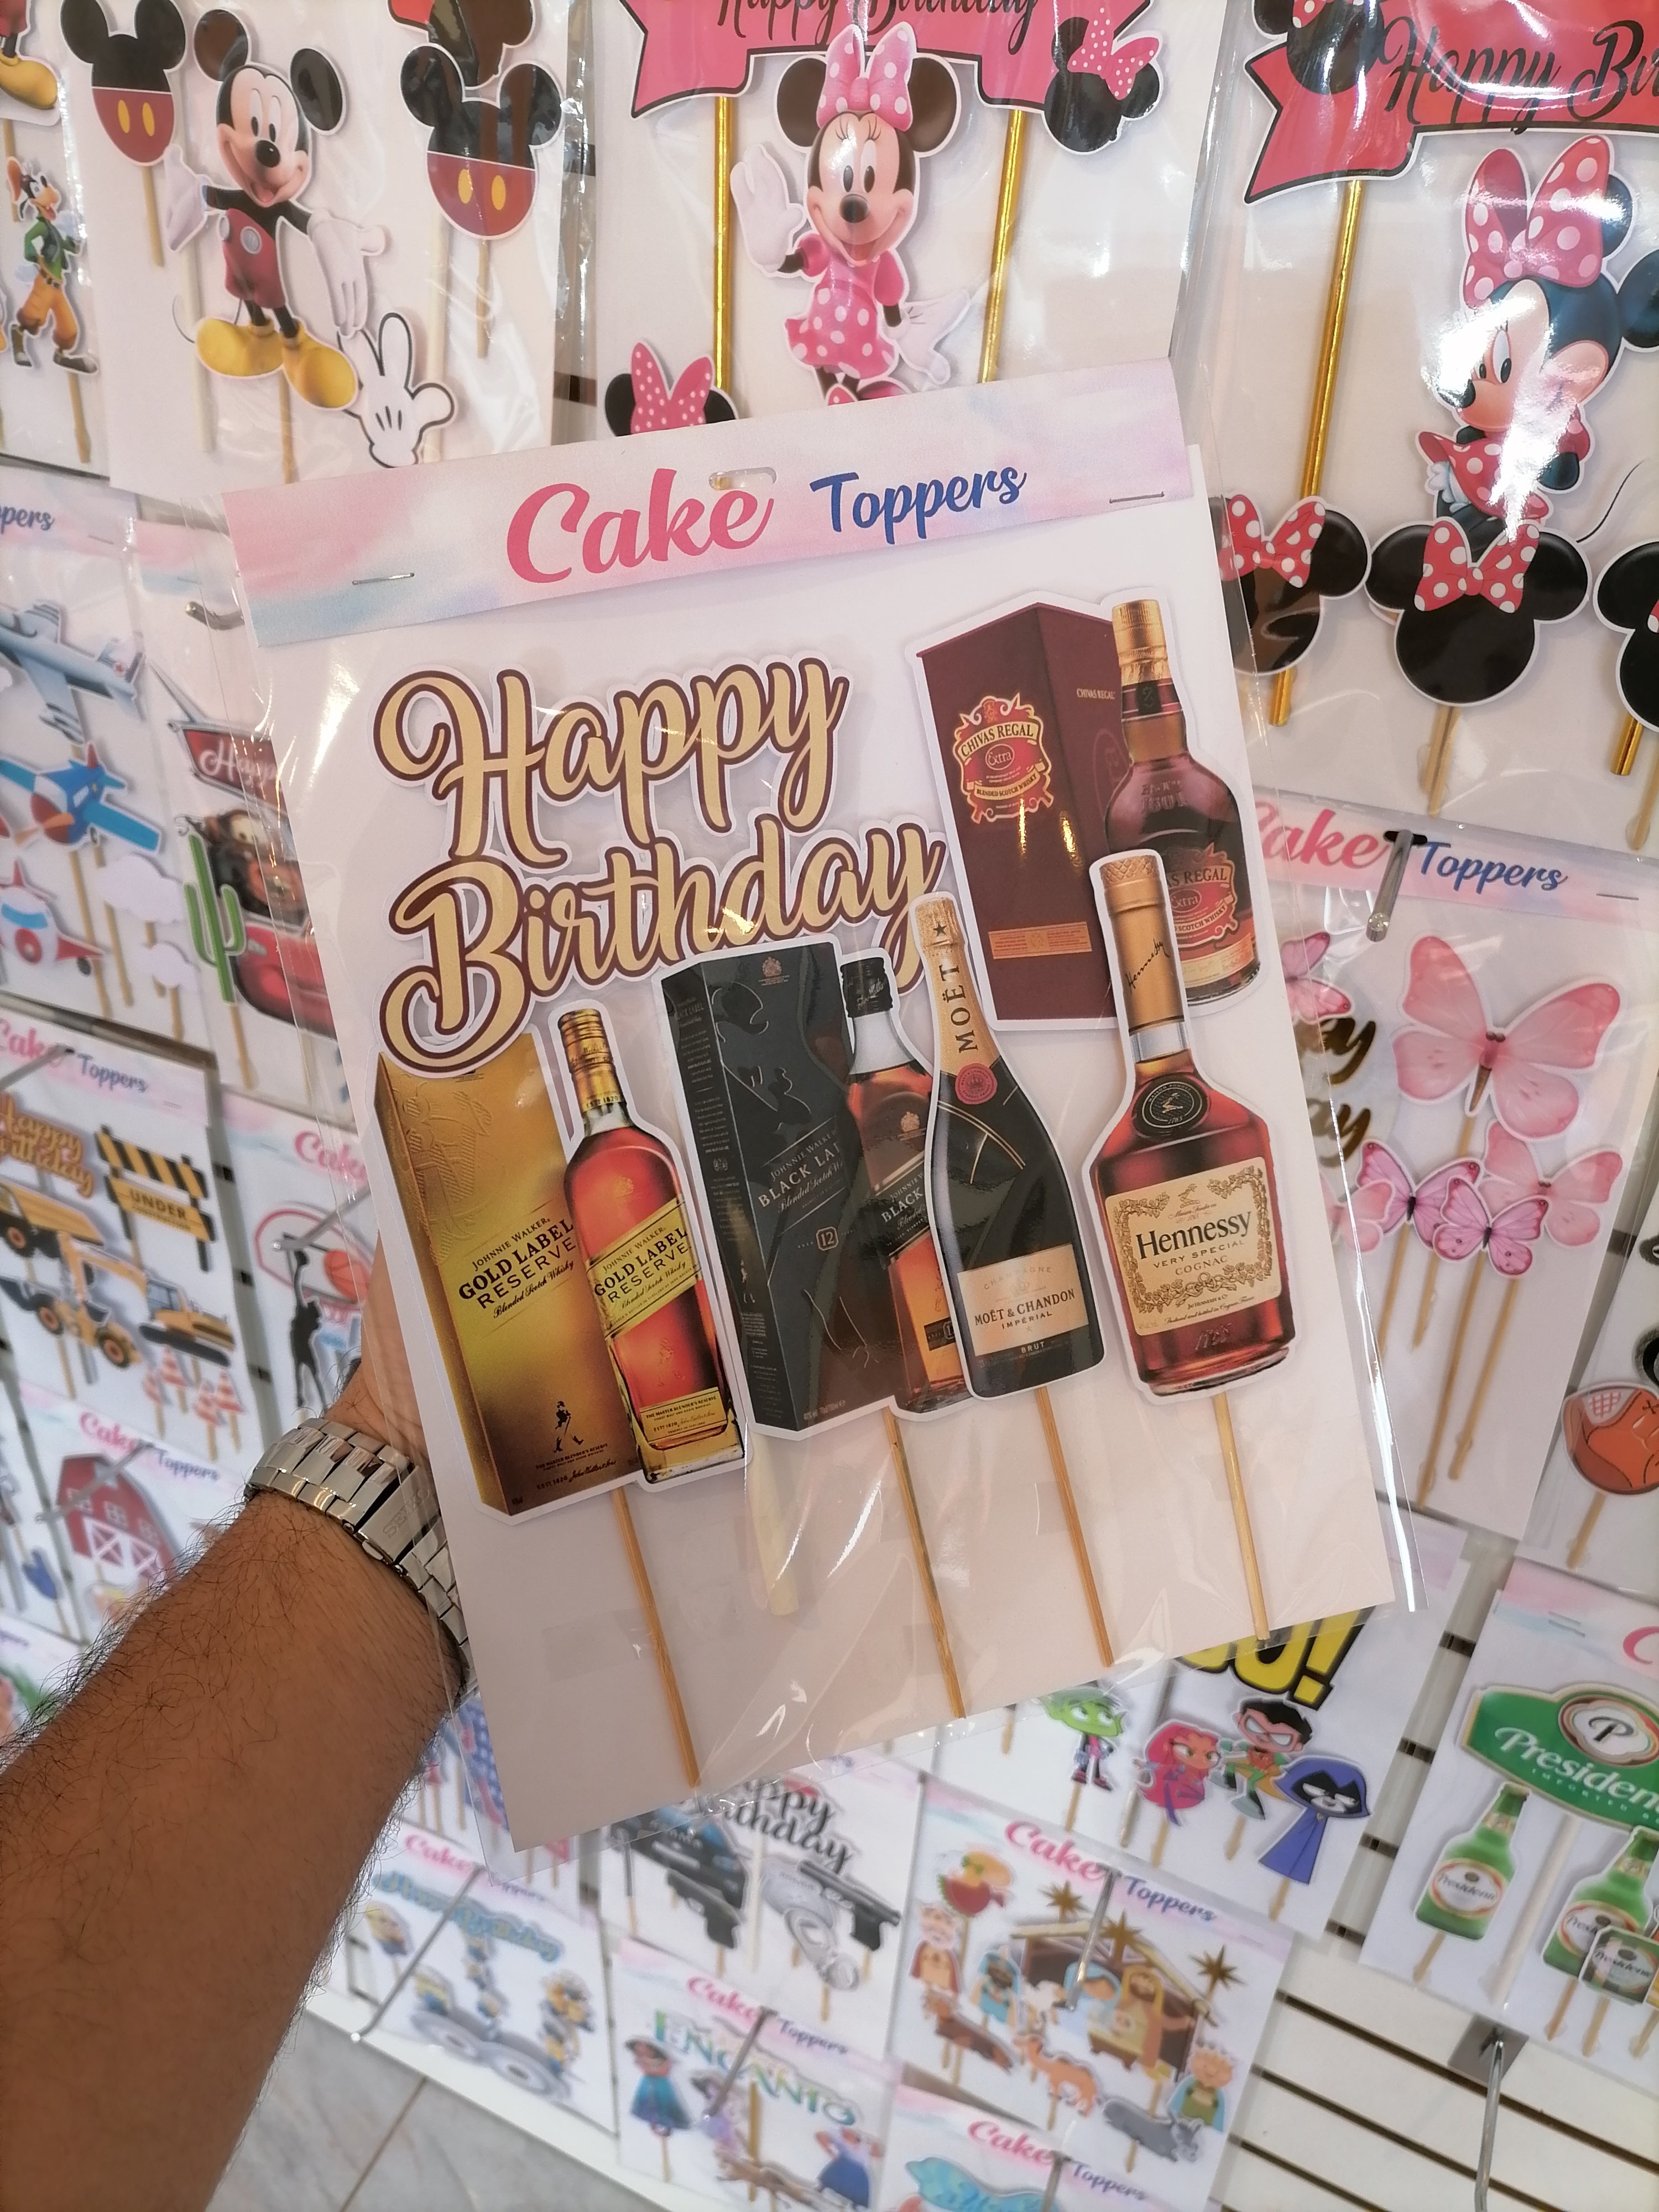 Best Alcohol Themed Cakes In Singapore